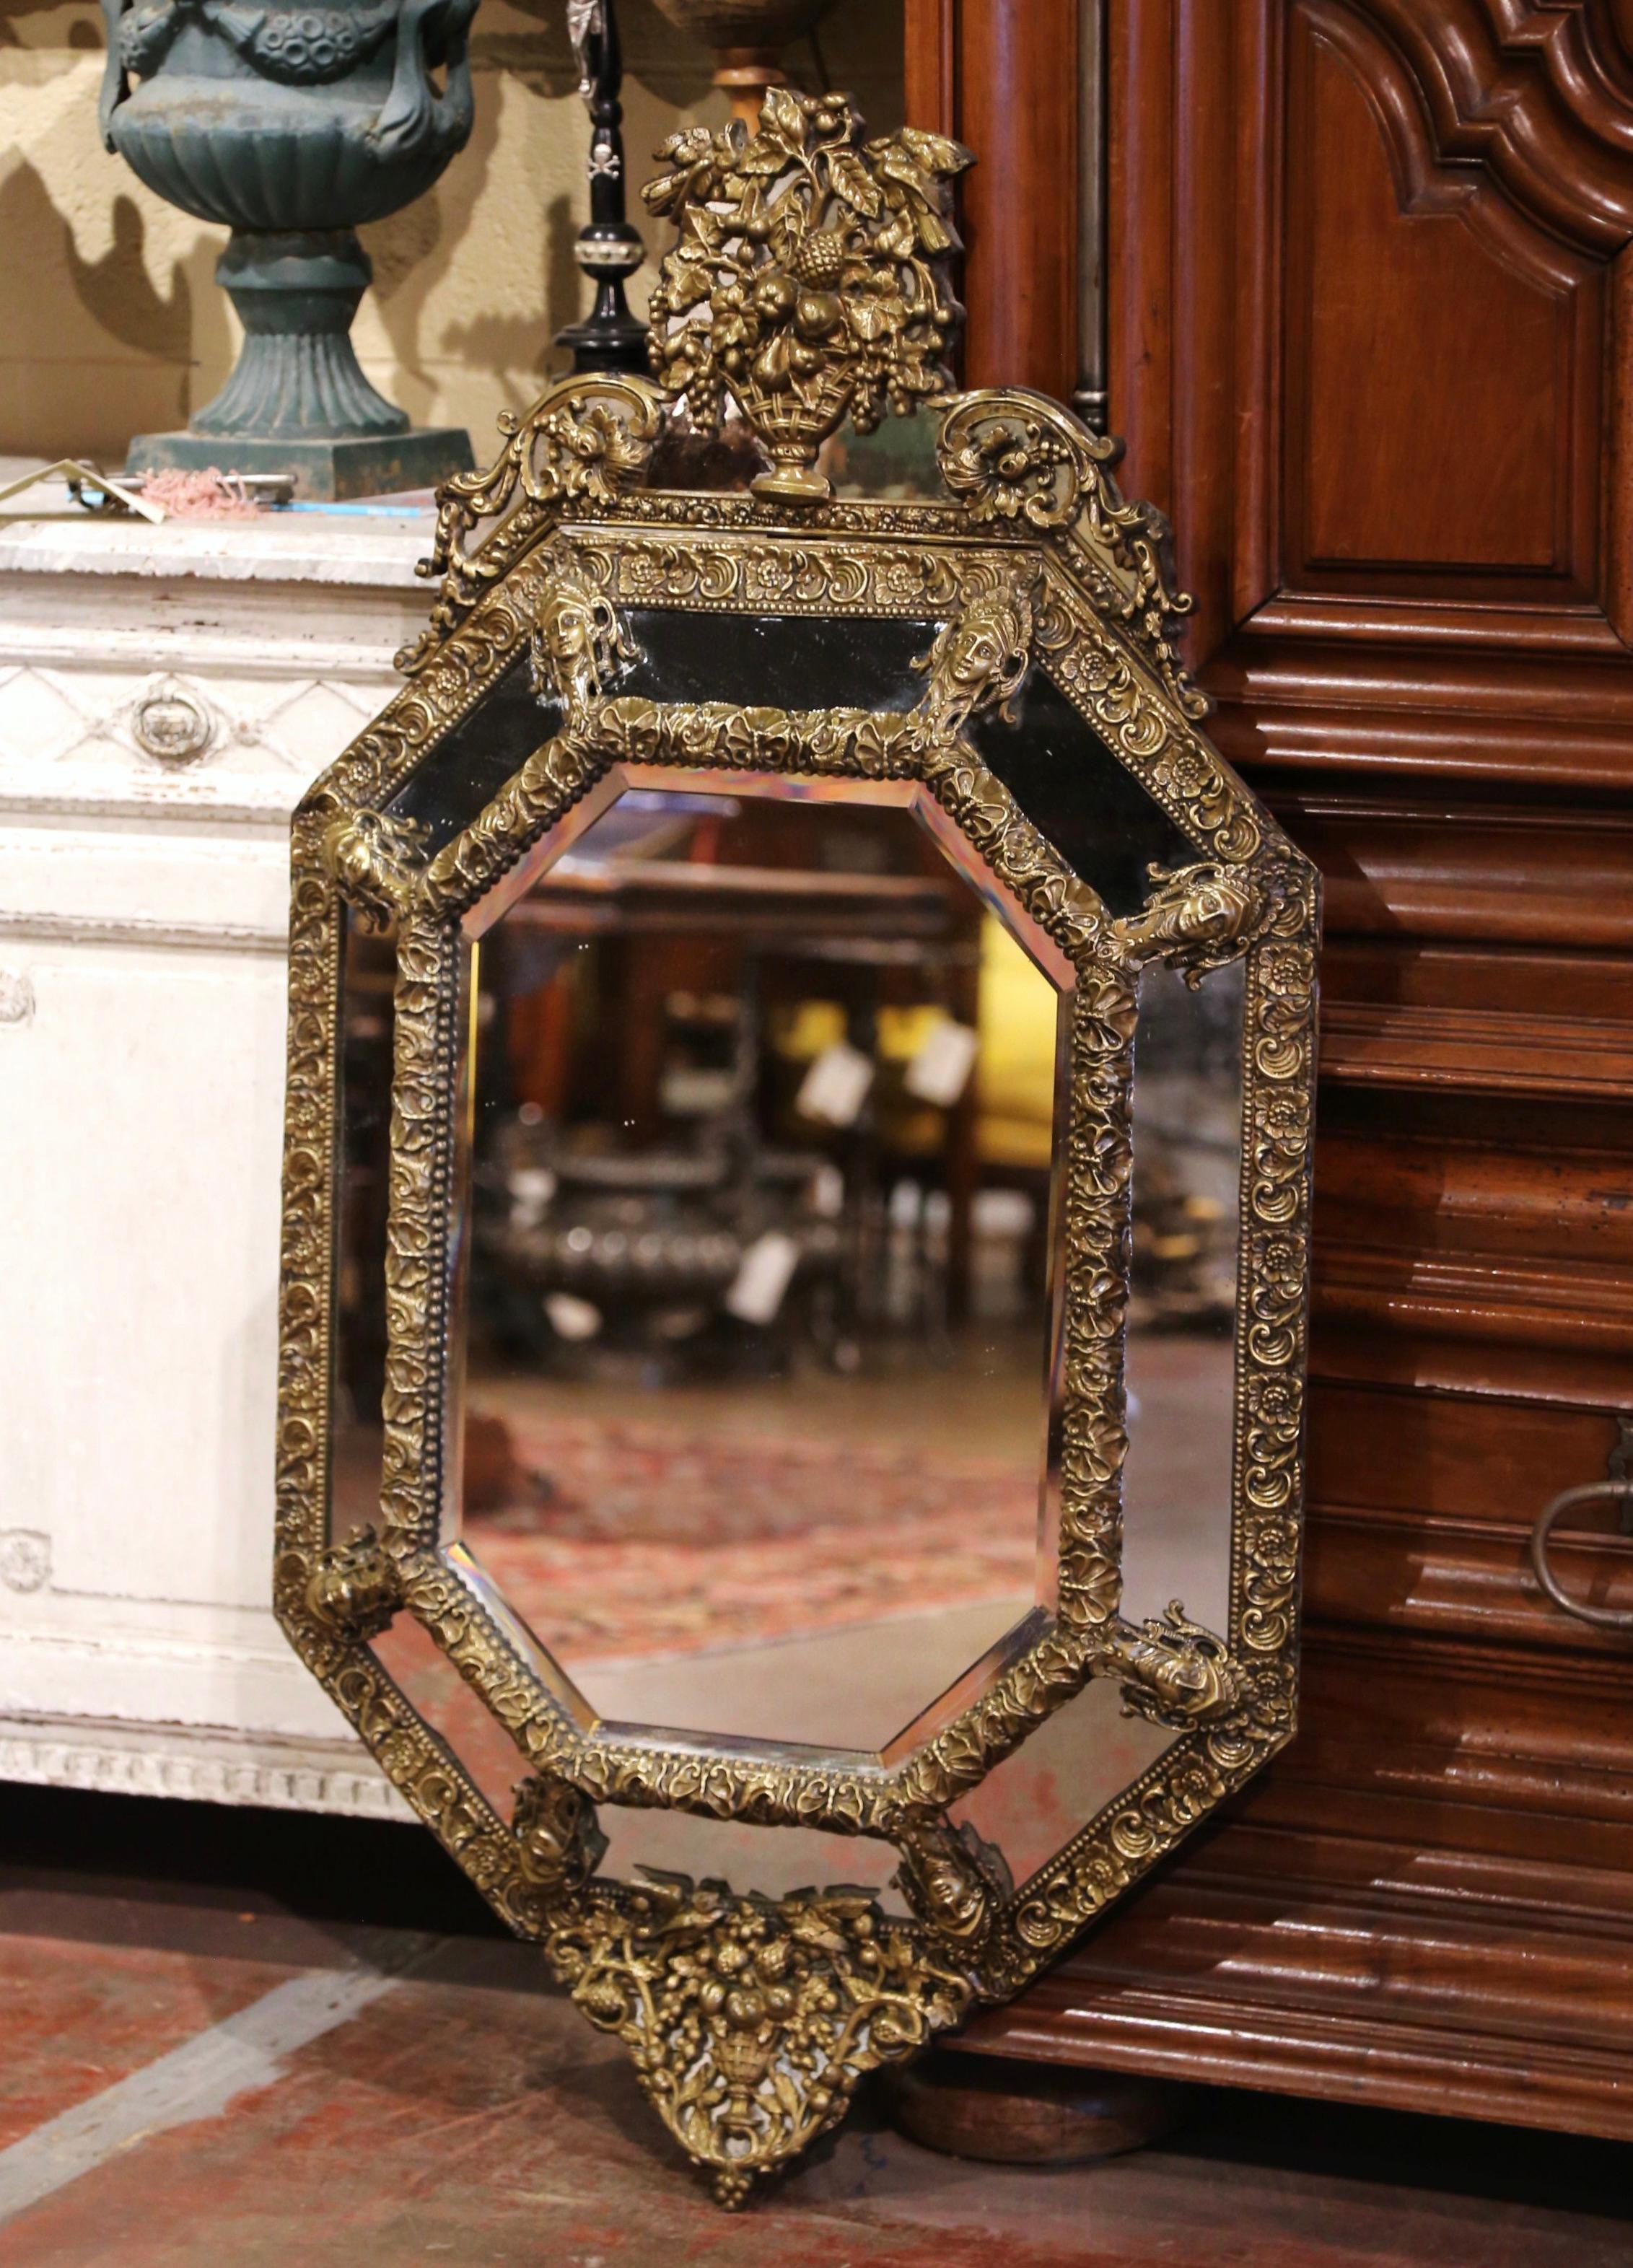 Created in France, circa 1870, the elegant antique wall mirror is octagonal in shape and decorated with intricate repousse decor around the frame; it includes a large vase cartouche at the pediment filled up with different fruit and flanked with